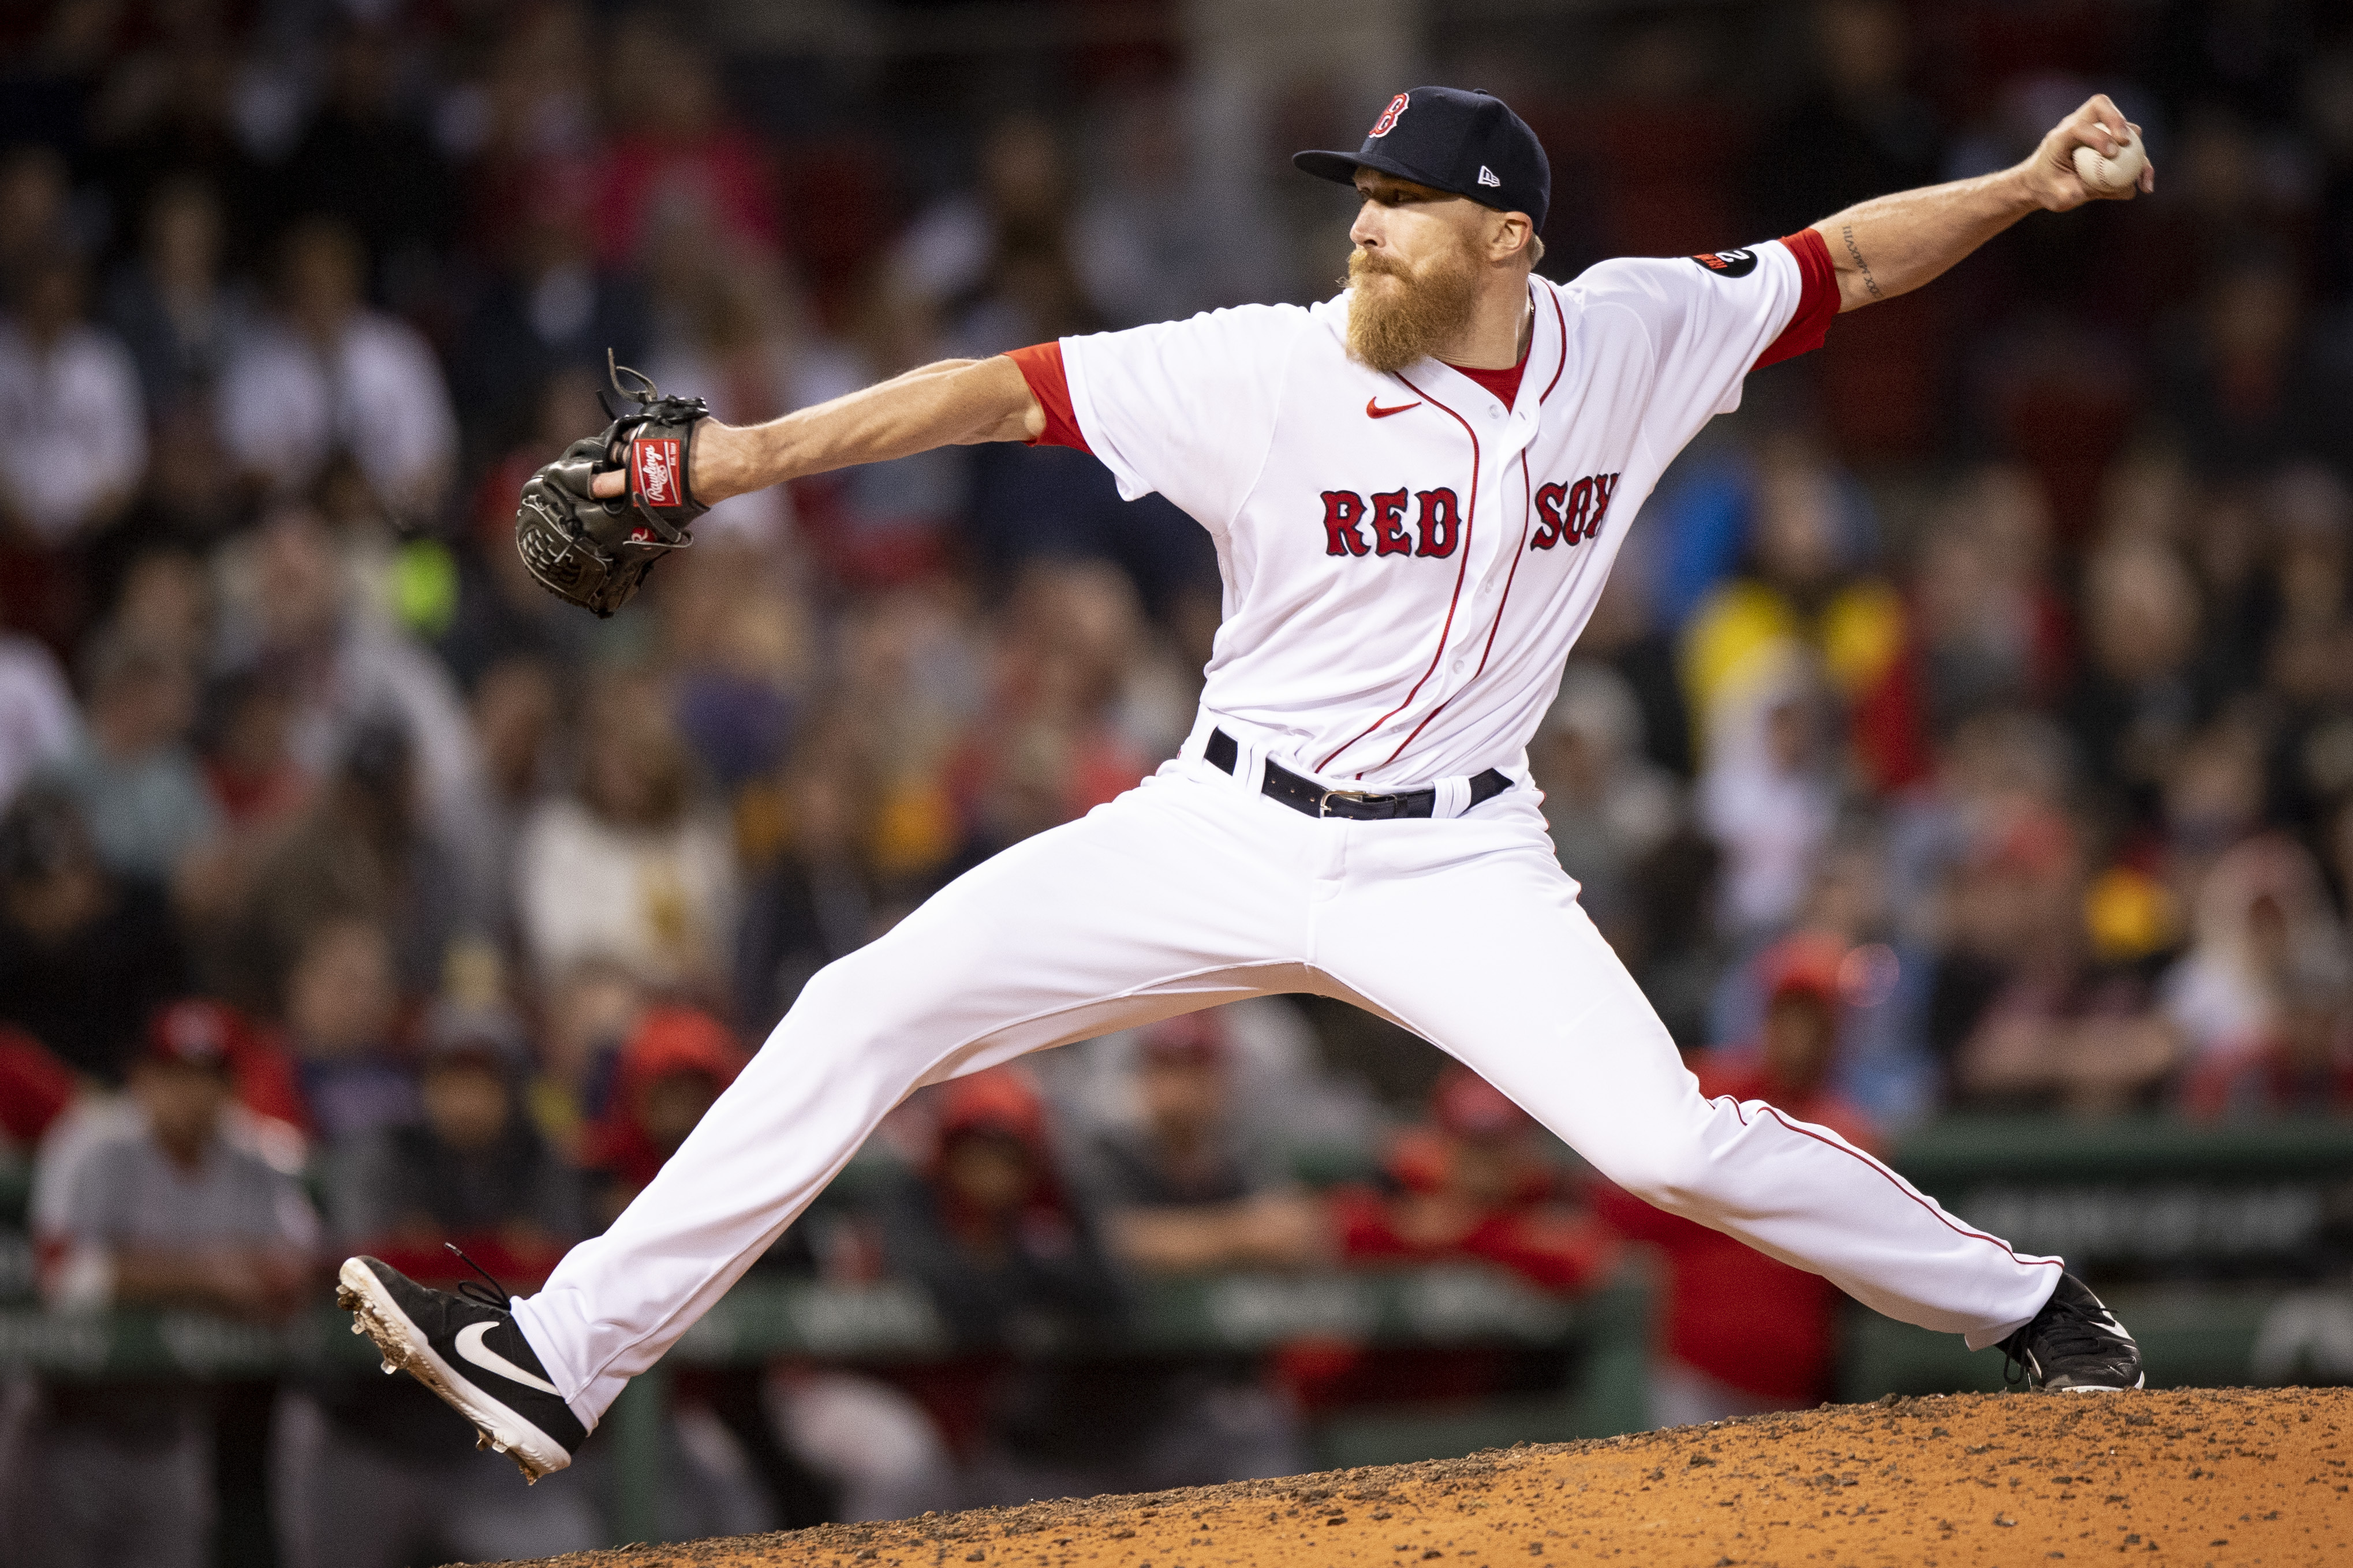 NESN launches streaming service with the Boston Red Sox and Bruins